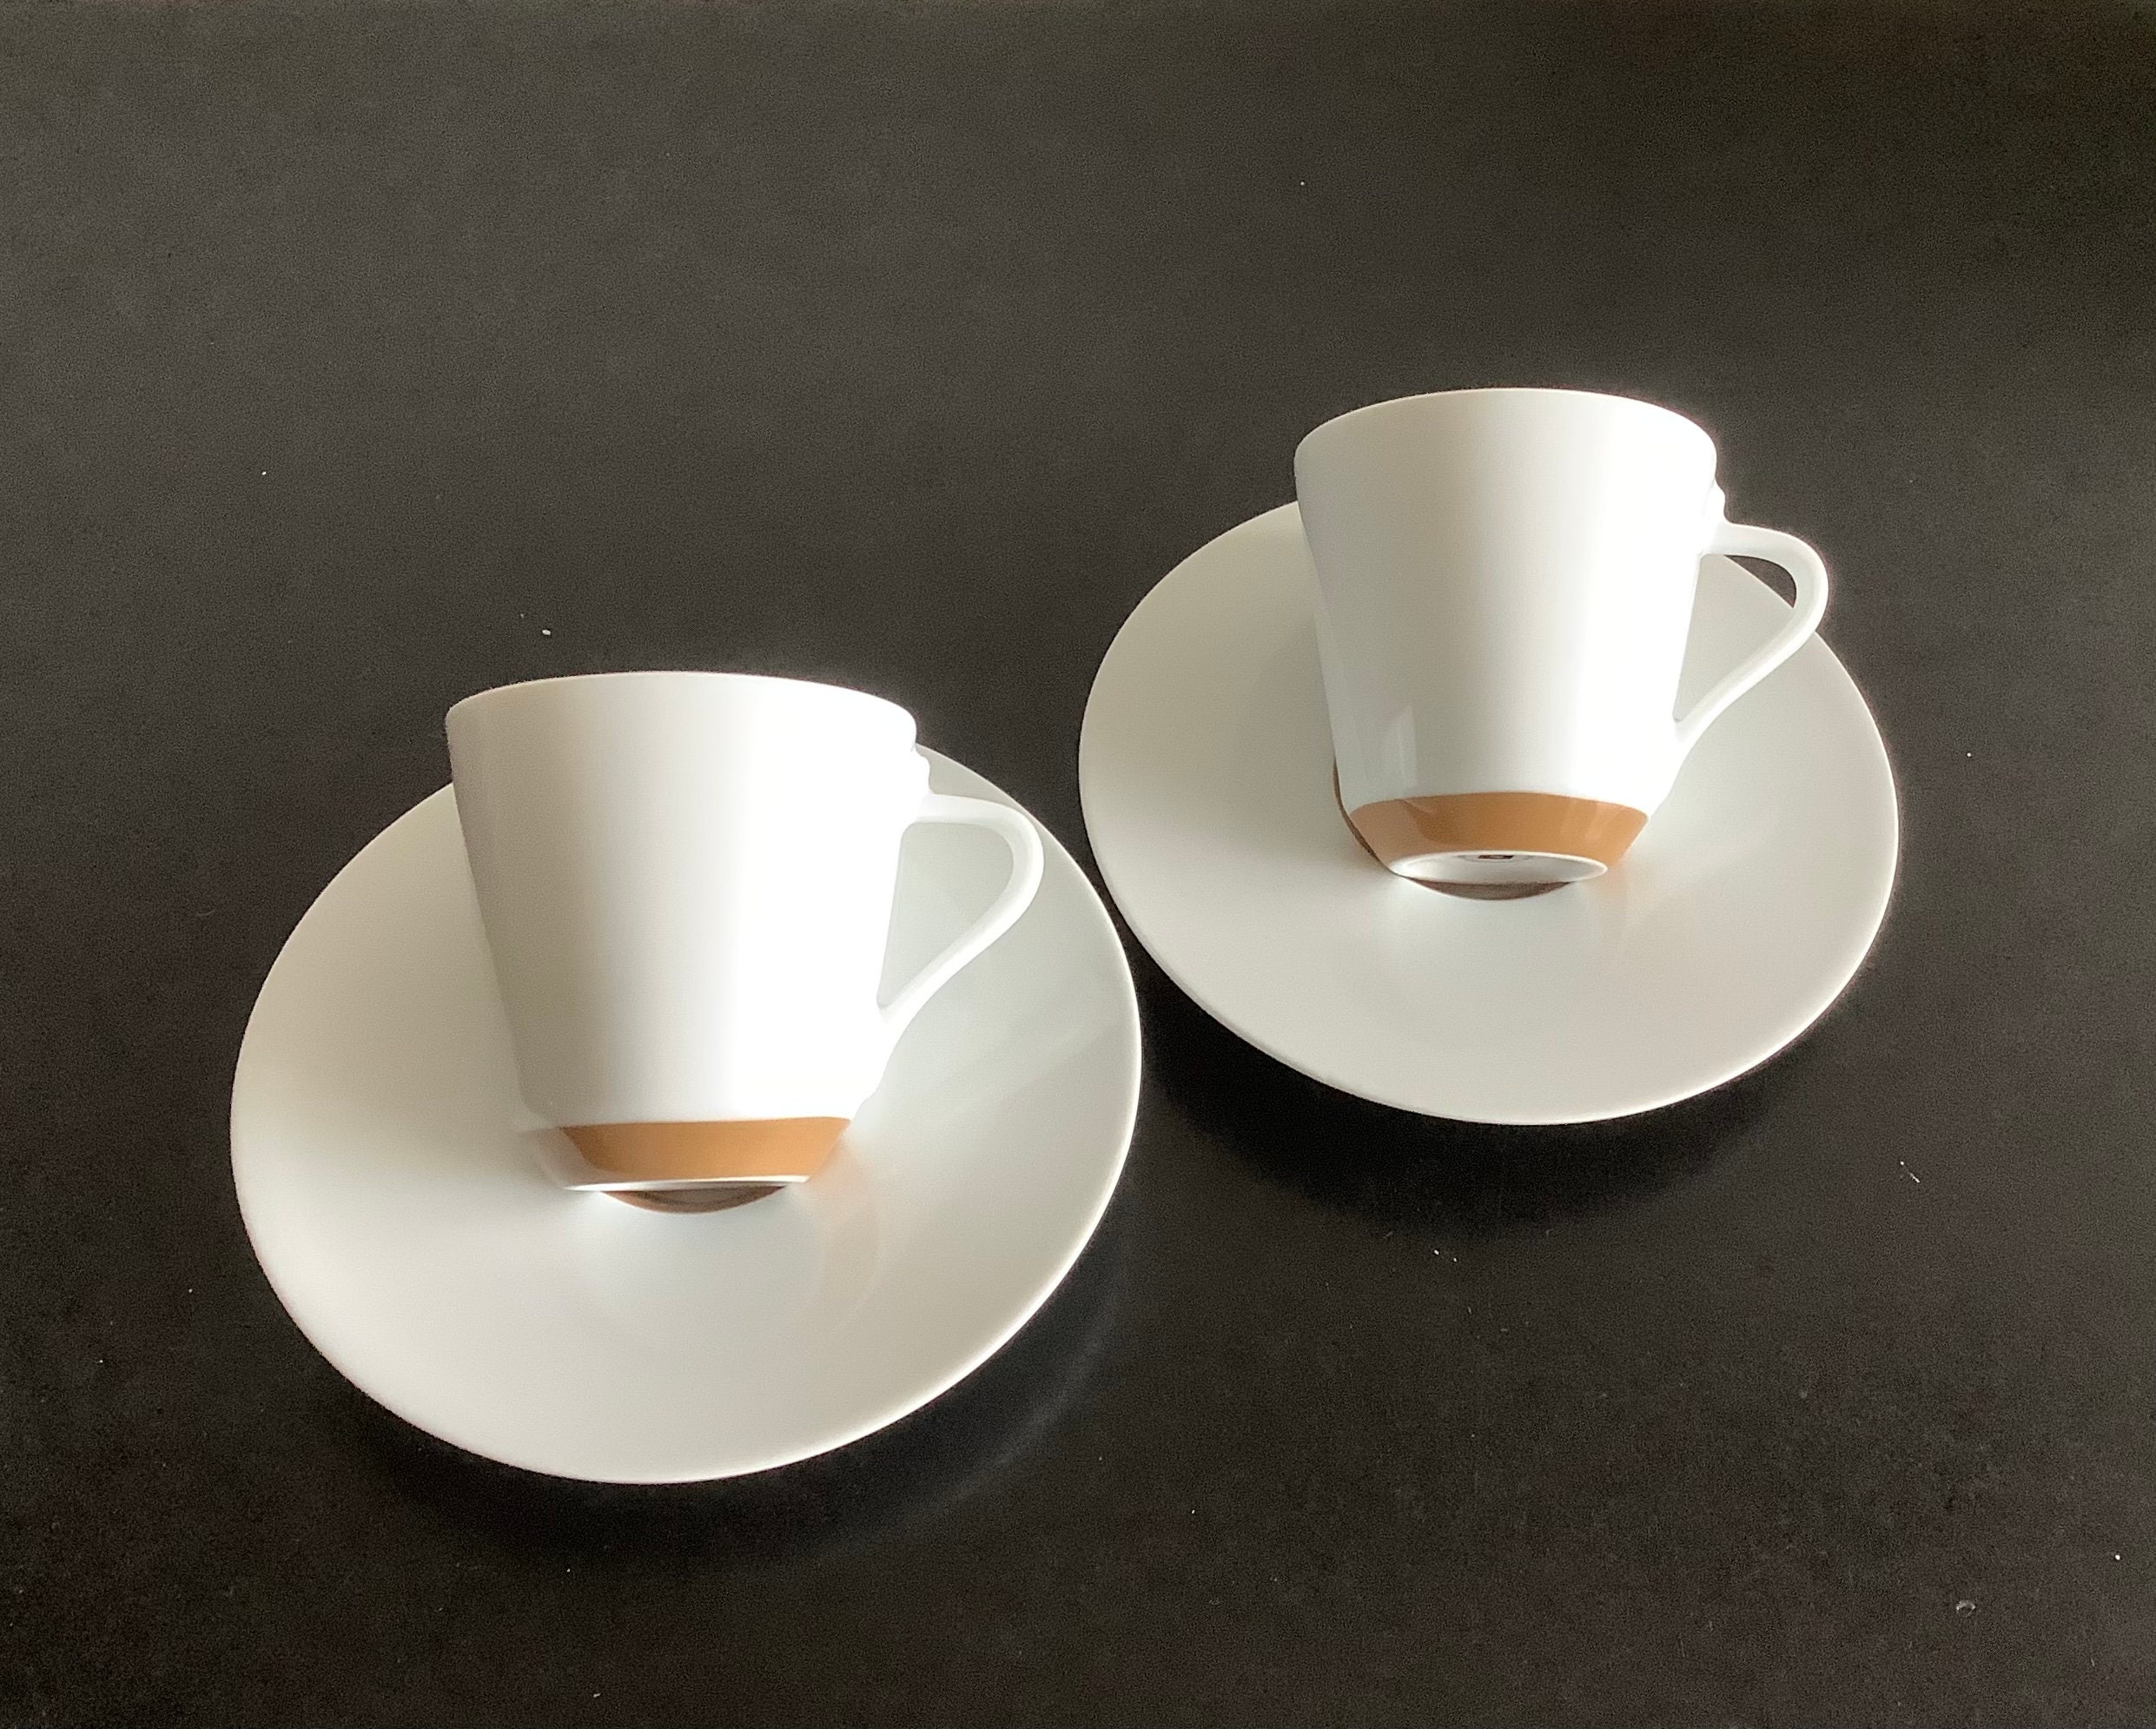 Nespresso 1X2 Pure Lungo Cups & 1X2 Saucers in Brand Box With sku,New